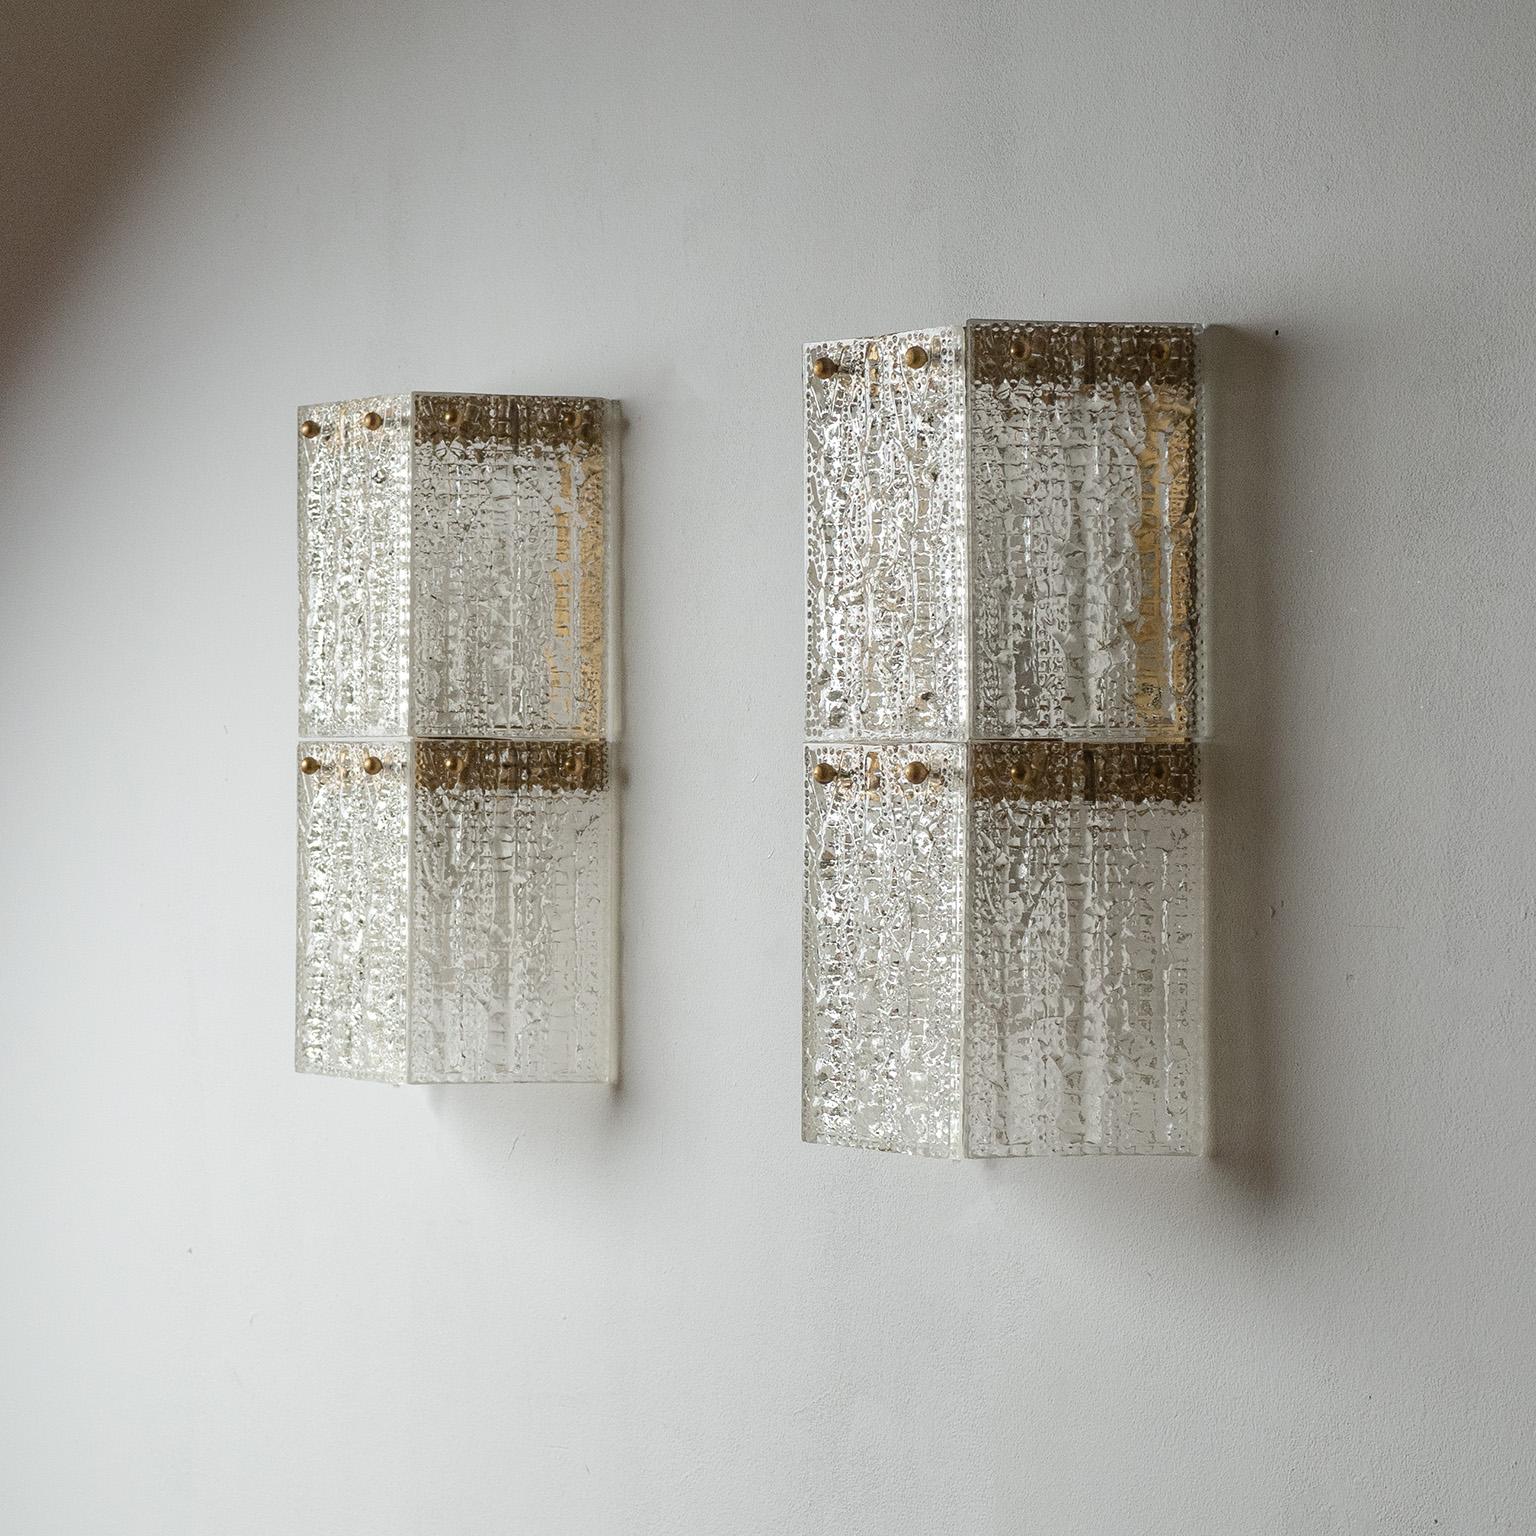 Large Swedish textured glass sconces from the 1960s, attributed to Orrefors. Semi-hexagonal shape with six heavily textured glass panes attached to a minimal brass structure. Two E27 sockets per light. Priced and sold as a pair.
Measures: Height